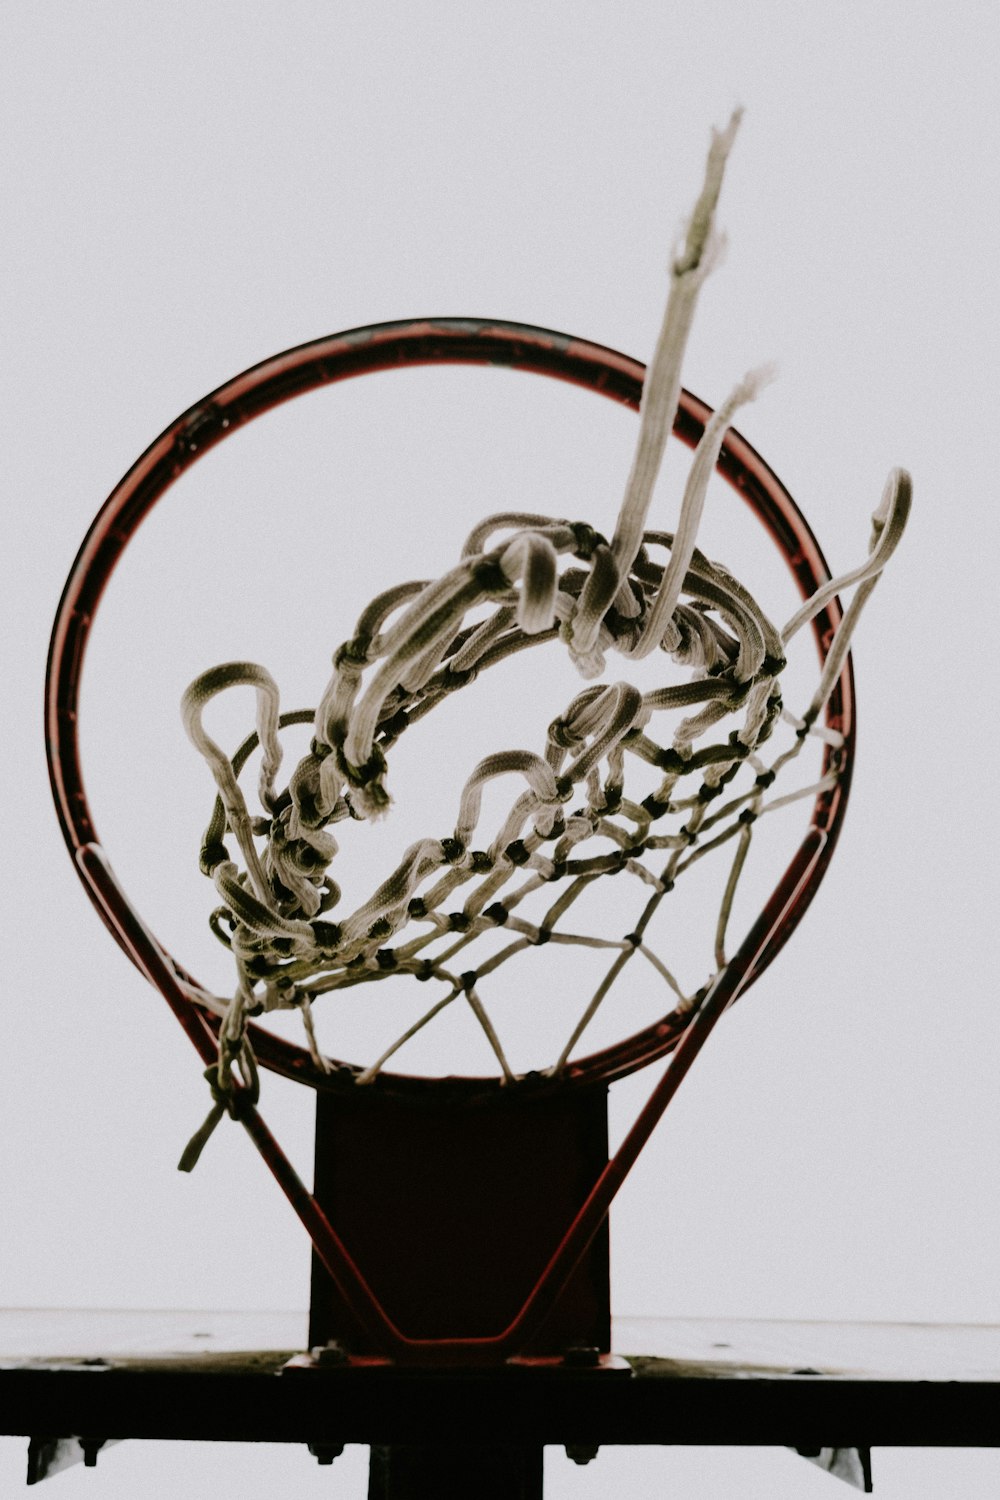 a close up of a basketball hoop with a basketball in it